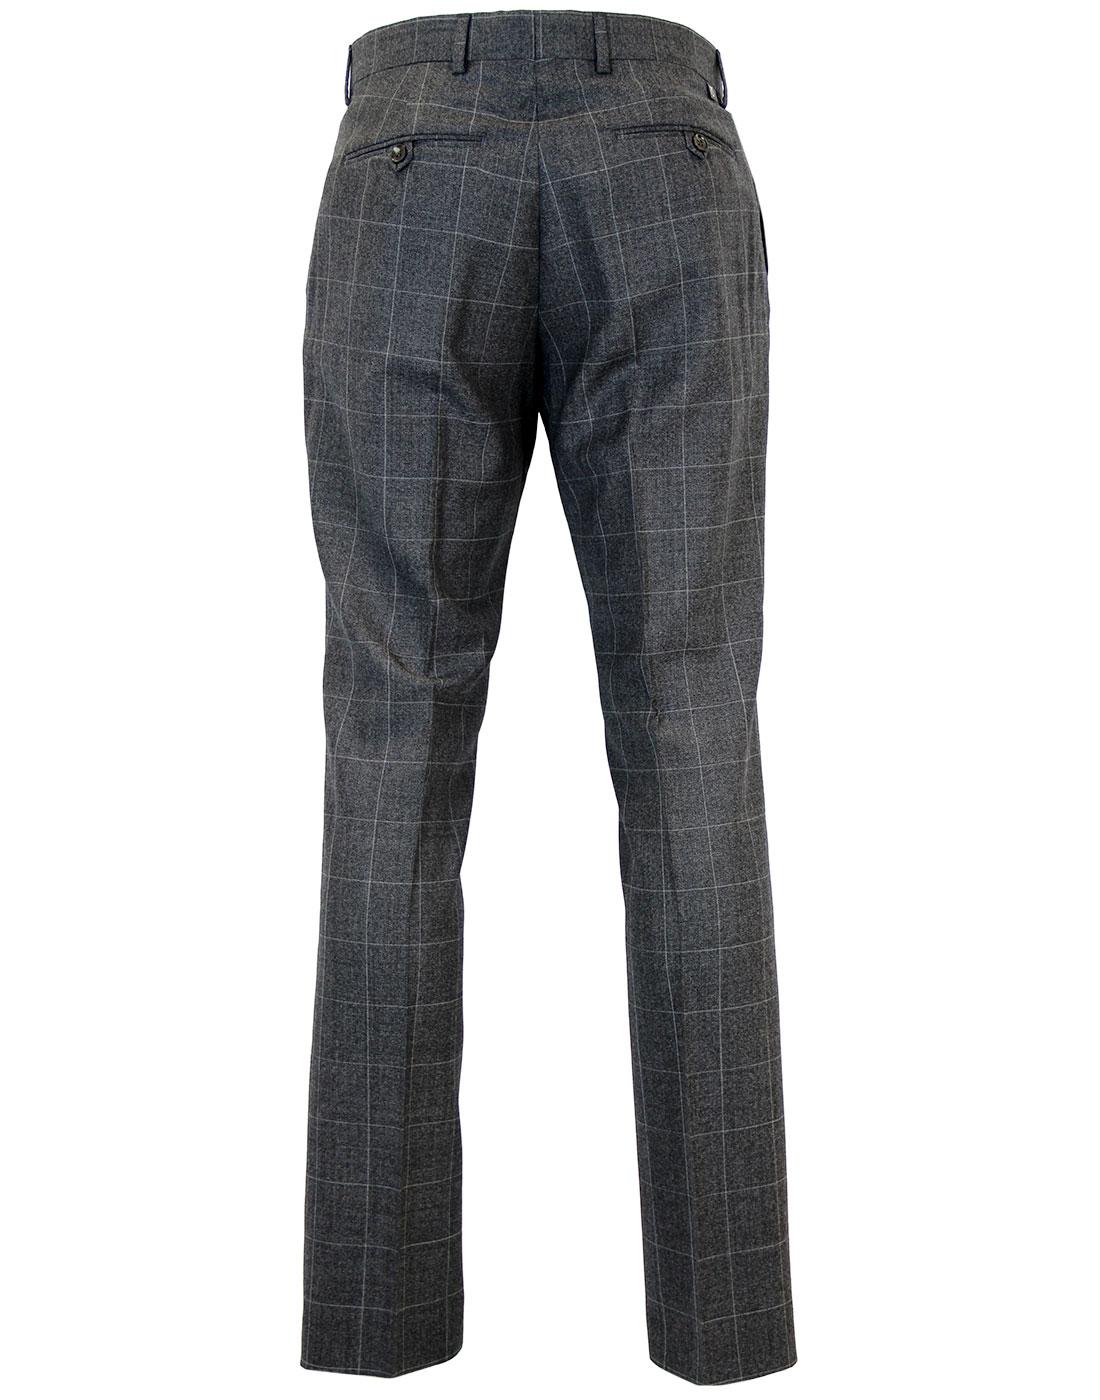 PETER WERTH Retro Mod Check Trousers in Charcoal